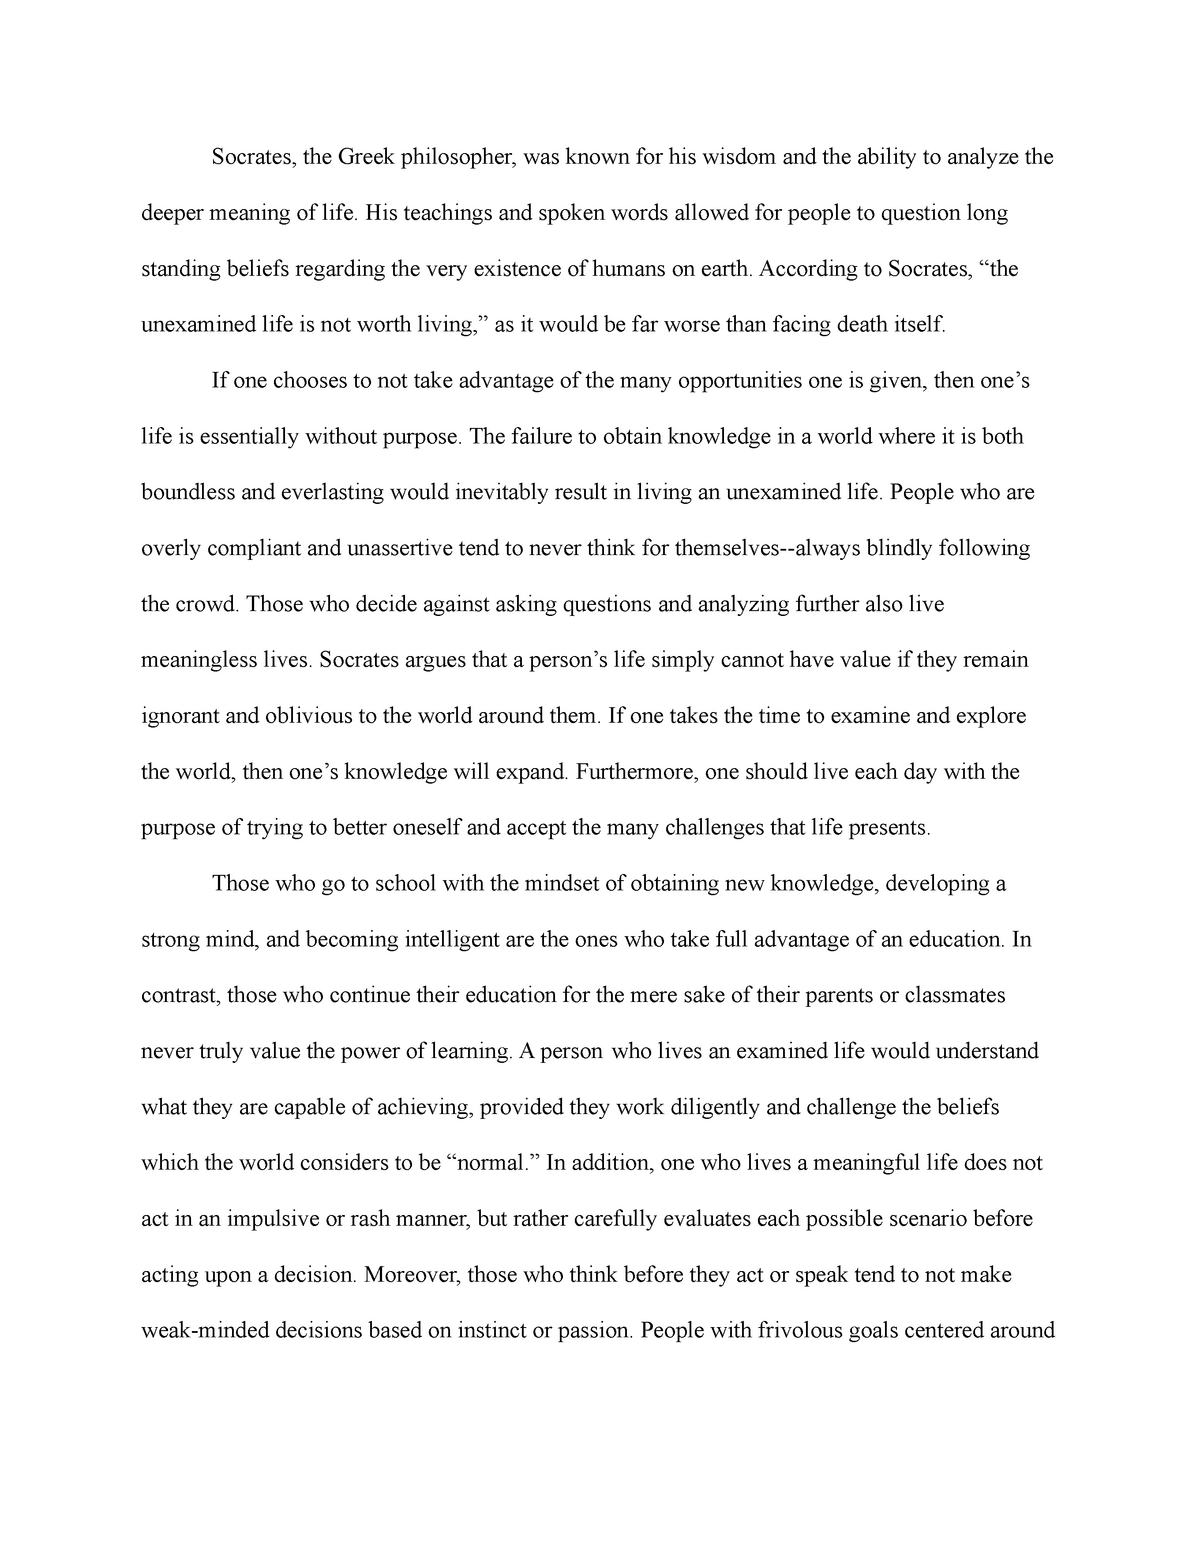 ou honors college essay